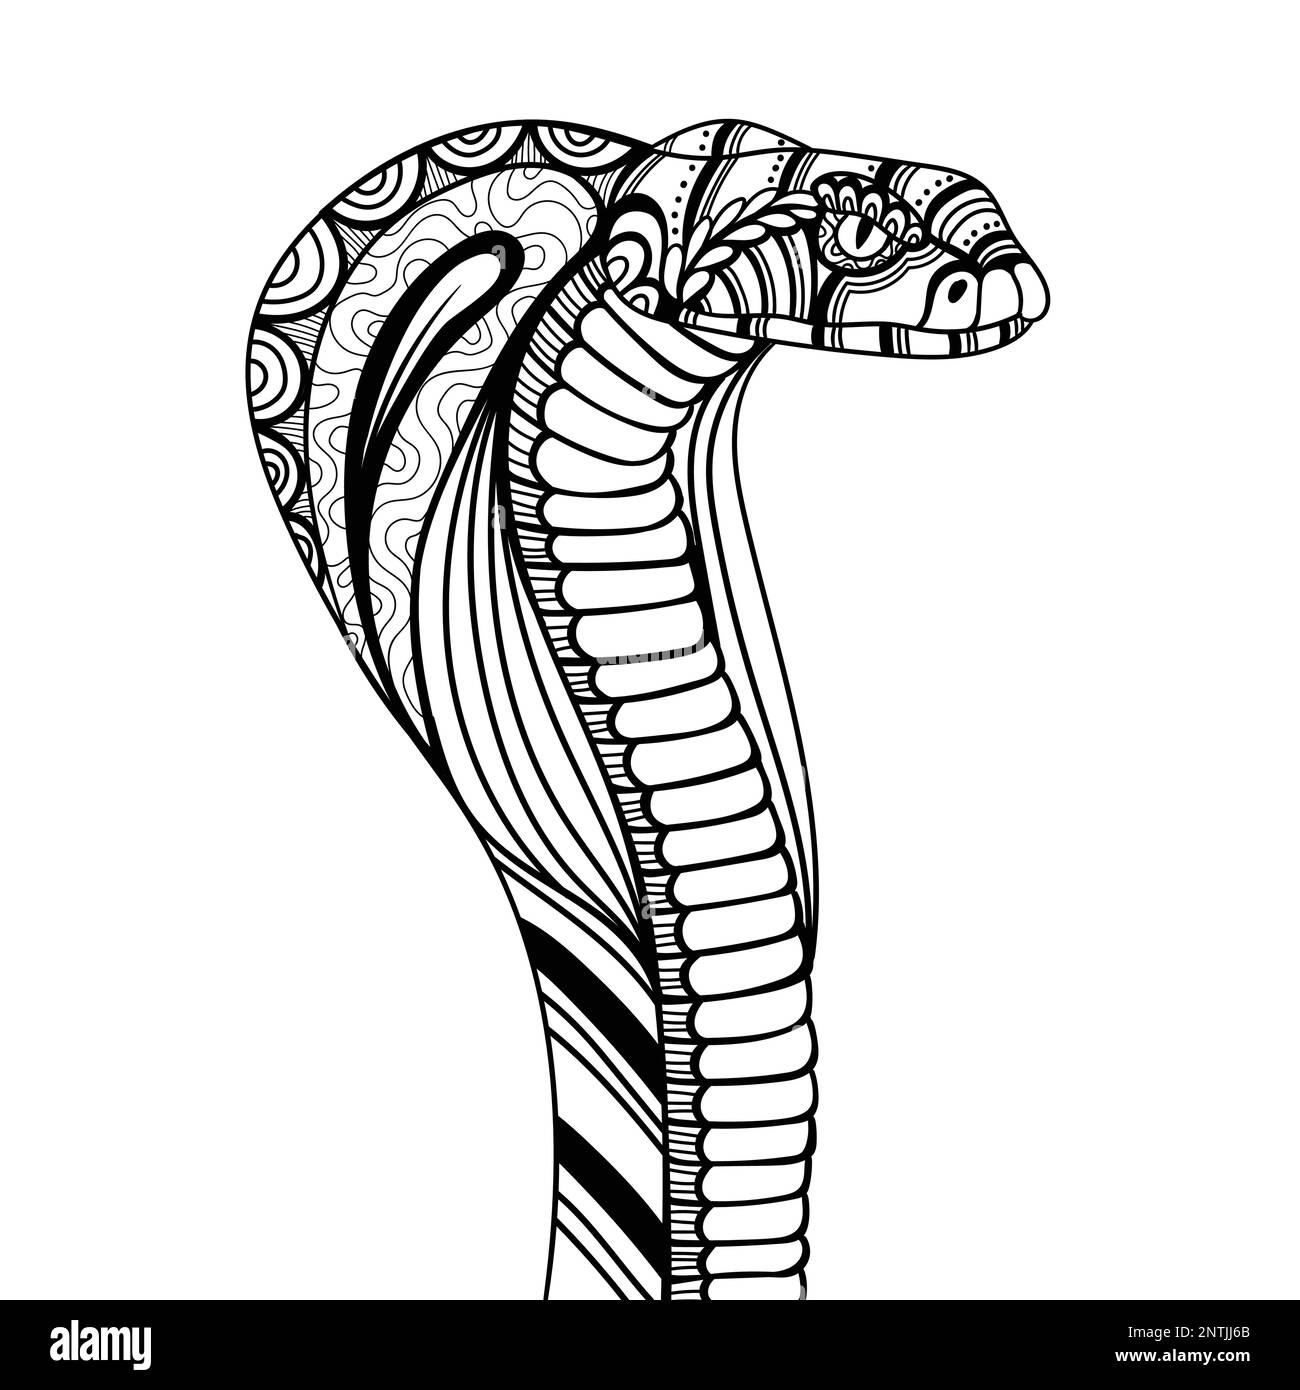 Snake cobra side position mandala zentangle coloring page illustration for your company or brand Stock Vector